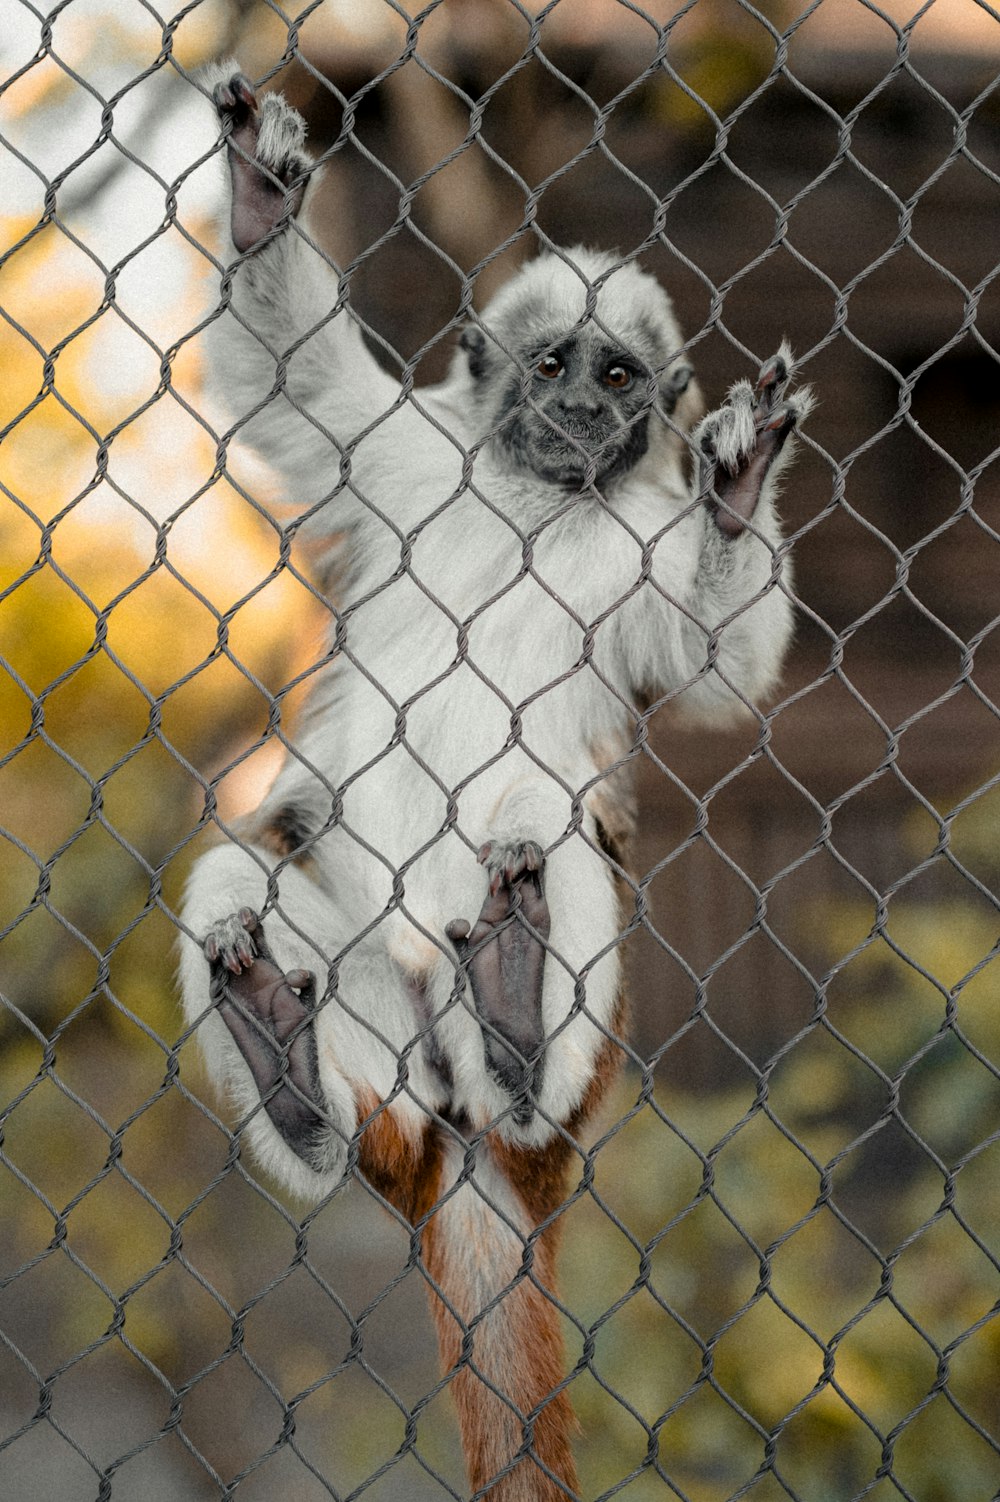 a small white and brown monkey hanging on a chain link fence